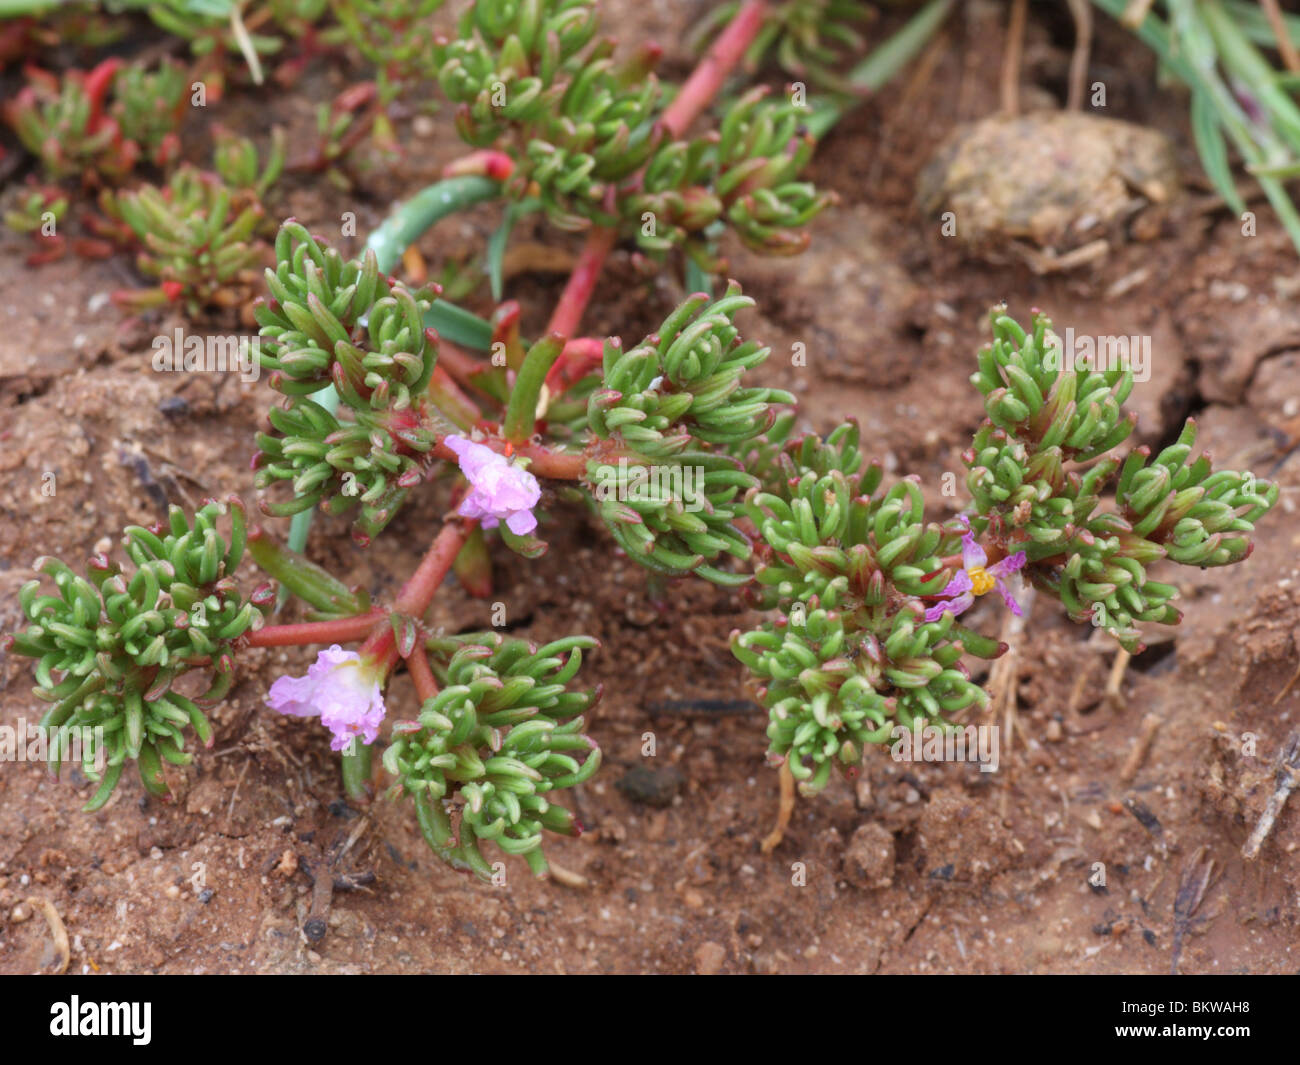 Sea Heath occurs along mediterranean coasts. It is found near sea on moist soils, where it forms loose mats.This species is Stock Photo